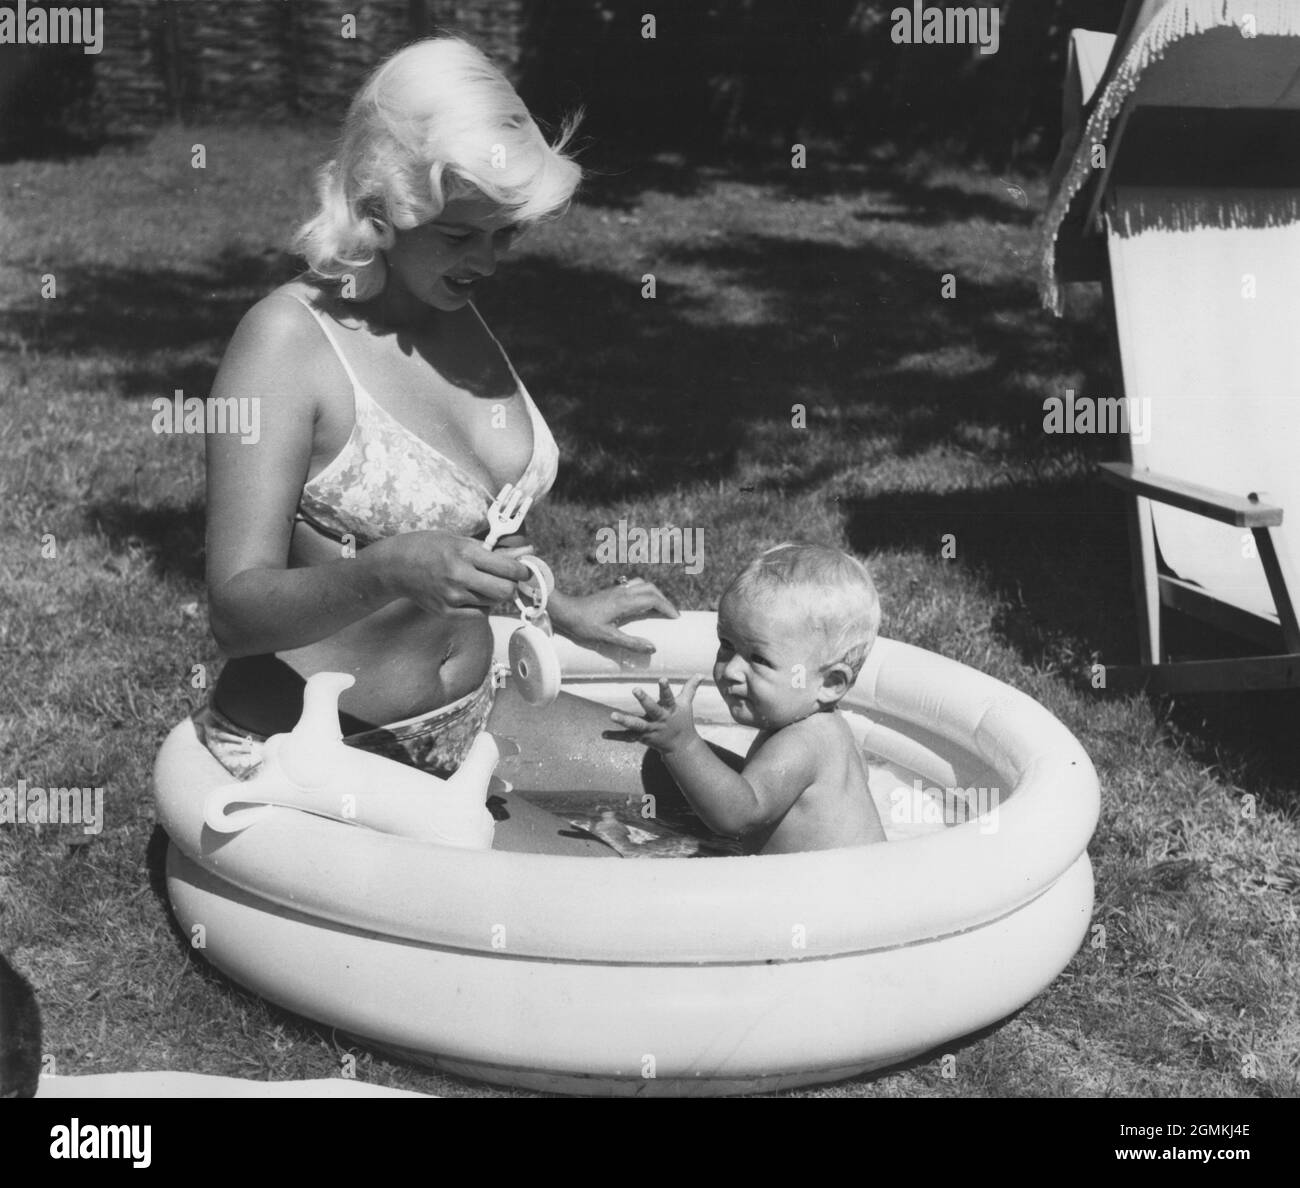 Oct. 1959 - Garrads Cross, England, United Kingdom - American actress JAYNE MANSFIELD and baby son MIKLAS play in a kiddie pool in the garden of the country house of H. Gregg where they have been staying.   (Credit Image: © Keystone Press Agency/ZUMA Wire) Stock Photo